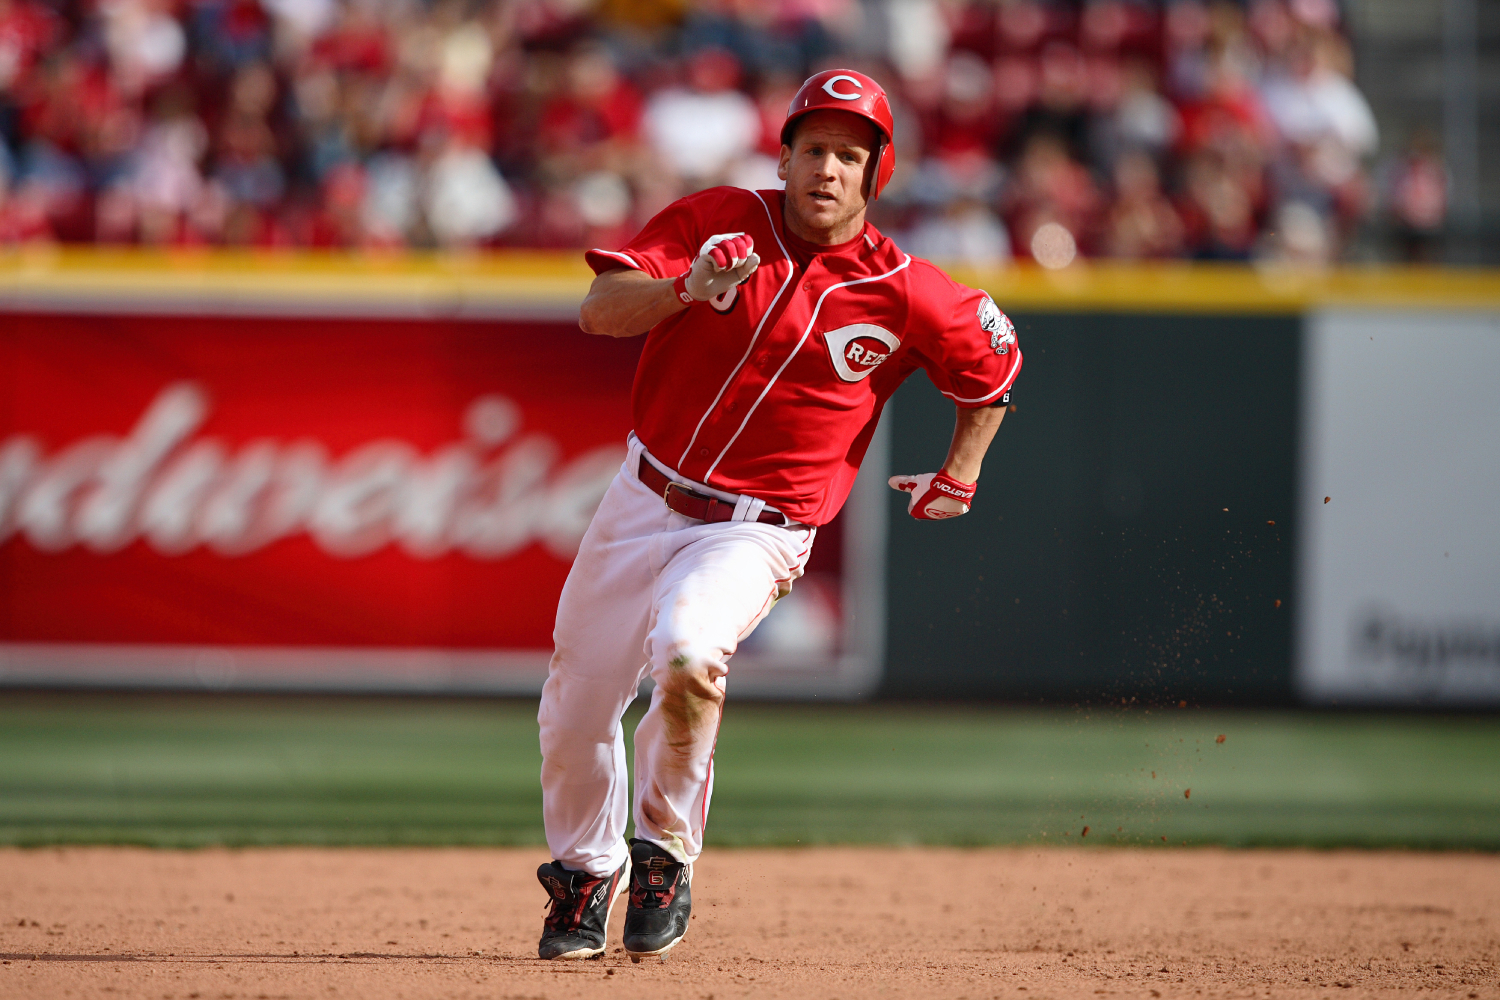 Ryan Freel became a fan favorite while playing for the Cincinnati Reds. He, however, sadly died shortly after his baseball career.